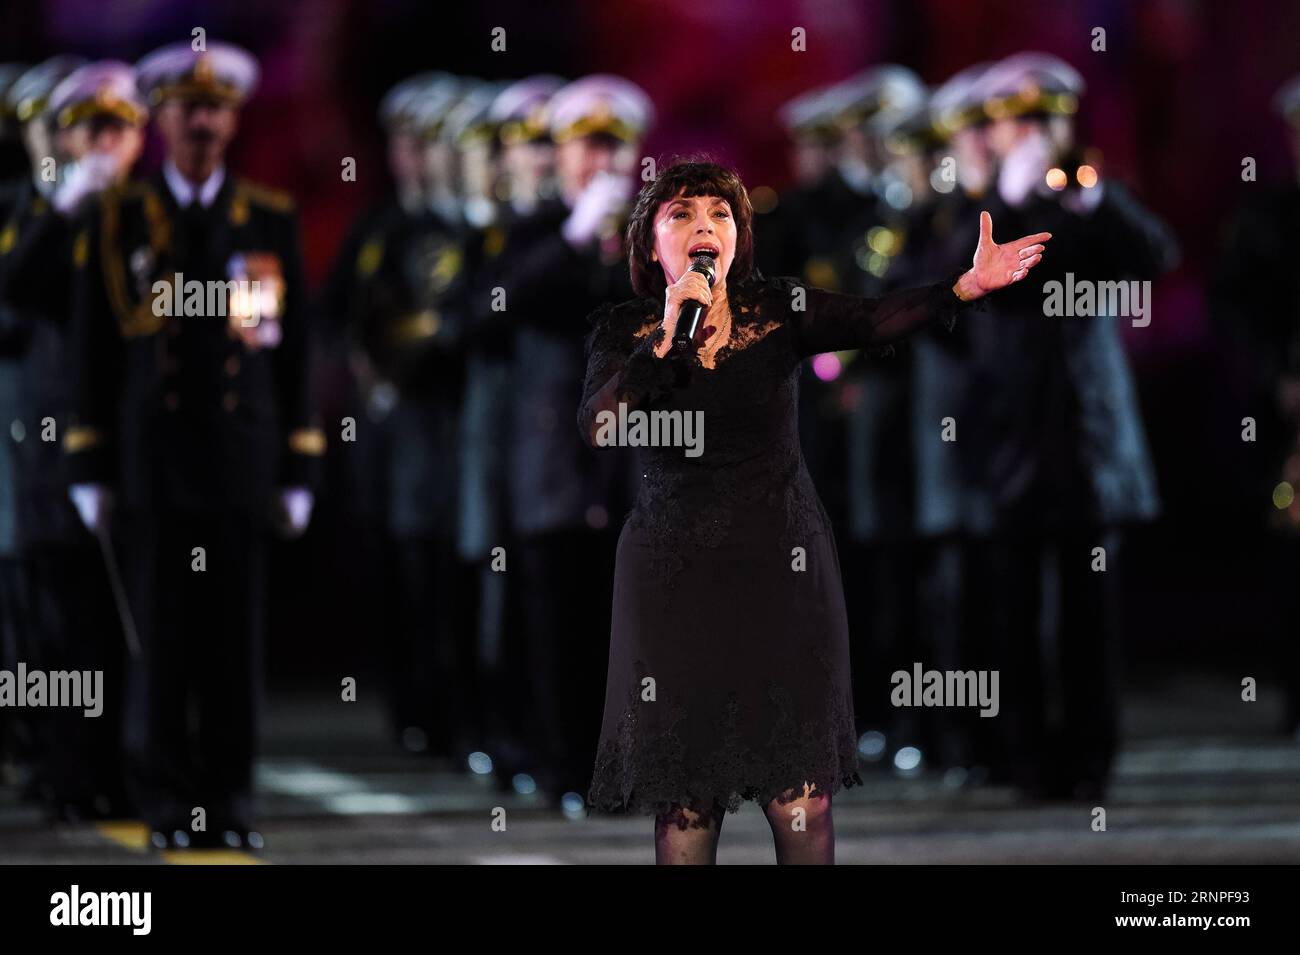 (170827) -- MOSCOW, Aug. 27, 2017 -- French singer Mireille Mathieu performs during the Spasskaya Tower International Military Music Festival in Moscow, Russia, on August 26, 2017. The Spasskaya Tower International Military Music Festival opened on Red Square in Moscow on Saturday. ) (dtf) RUSSIA-MOSCOW-FESTIVAL-SPASSKAYA TOWER EvgenyxSinitsyn PUBLICATIONxNOTxINxCHN   Moscow Aug 27 2017 French Singer Mireille Mathieu performs during The Fun Kaya Tower International Military Music Festival in Moscow Russia ON August 26 2017 The Fun Kaya Tower International Military Music Festival opened ON Red Stock Photo